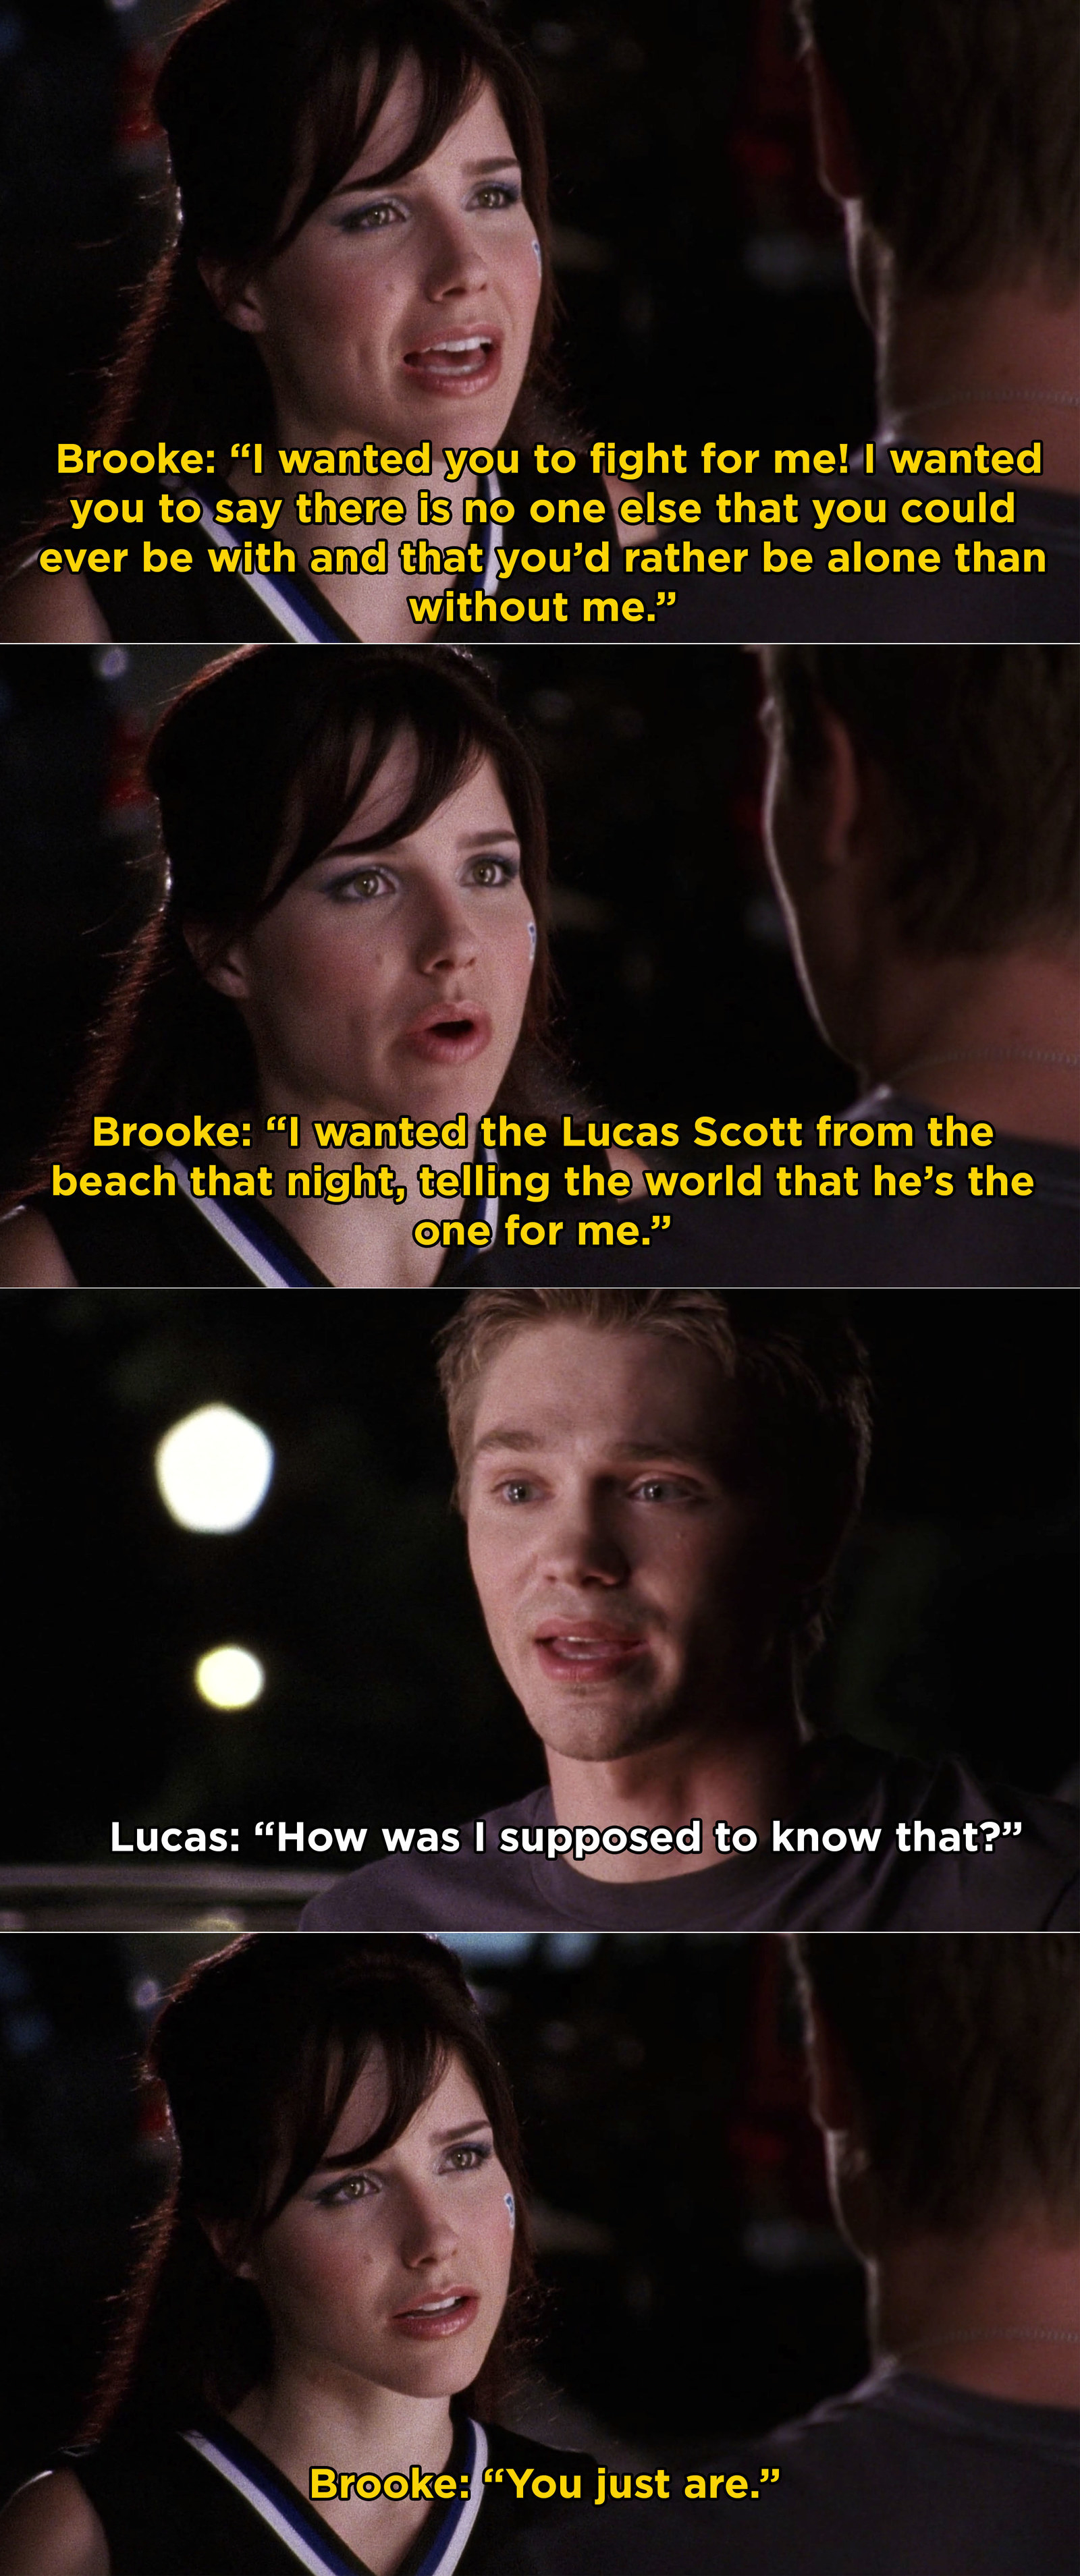 Brooke: &quot;What I wanted? I wanted you to fight for me! I wanted you to say that there was no one else that you could ever be with and that you&#x27;d rather be alone than without me, I wanted the Lucas Scott from the beach that night&quot;